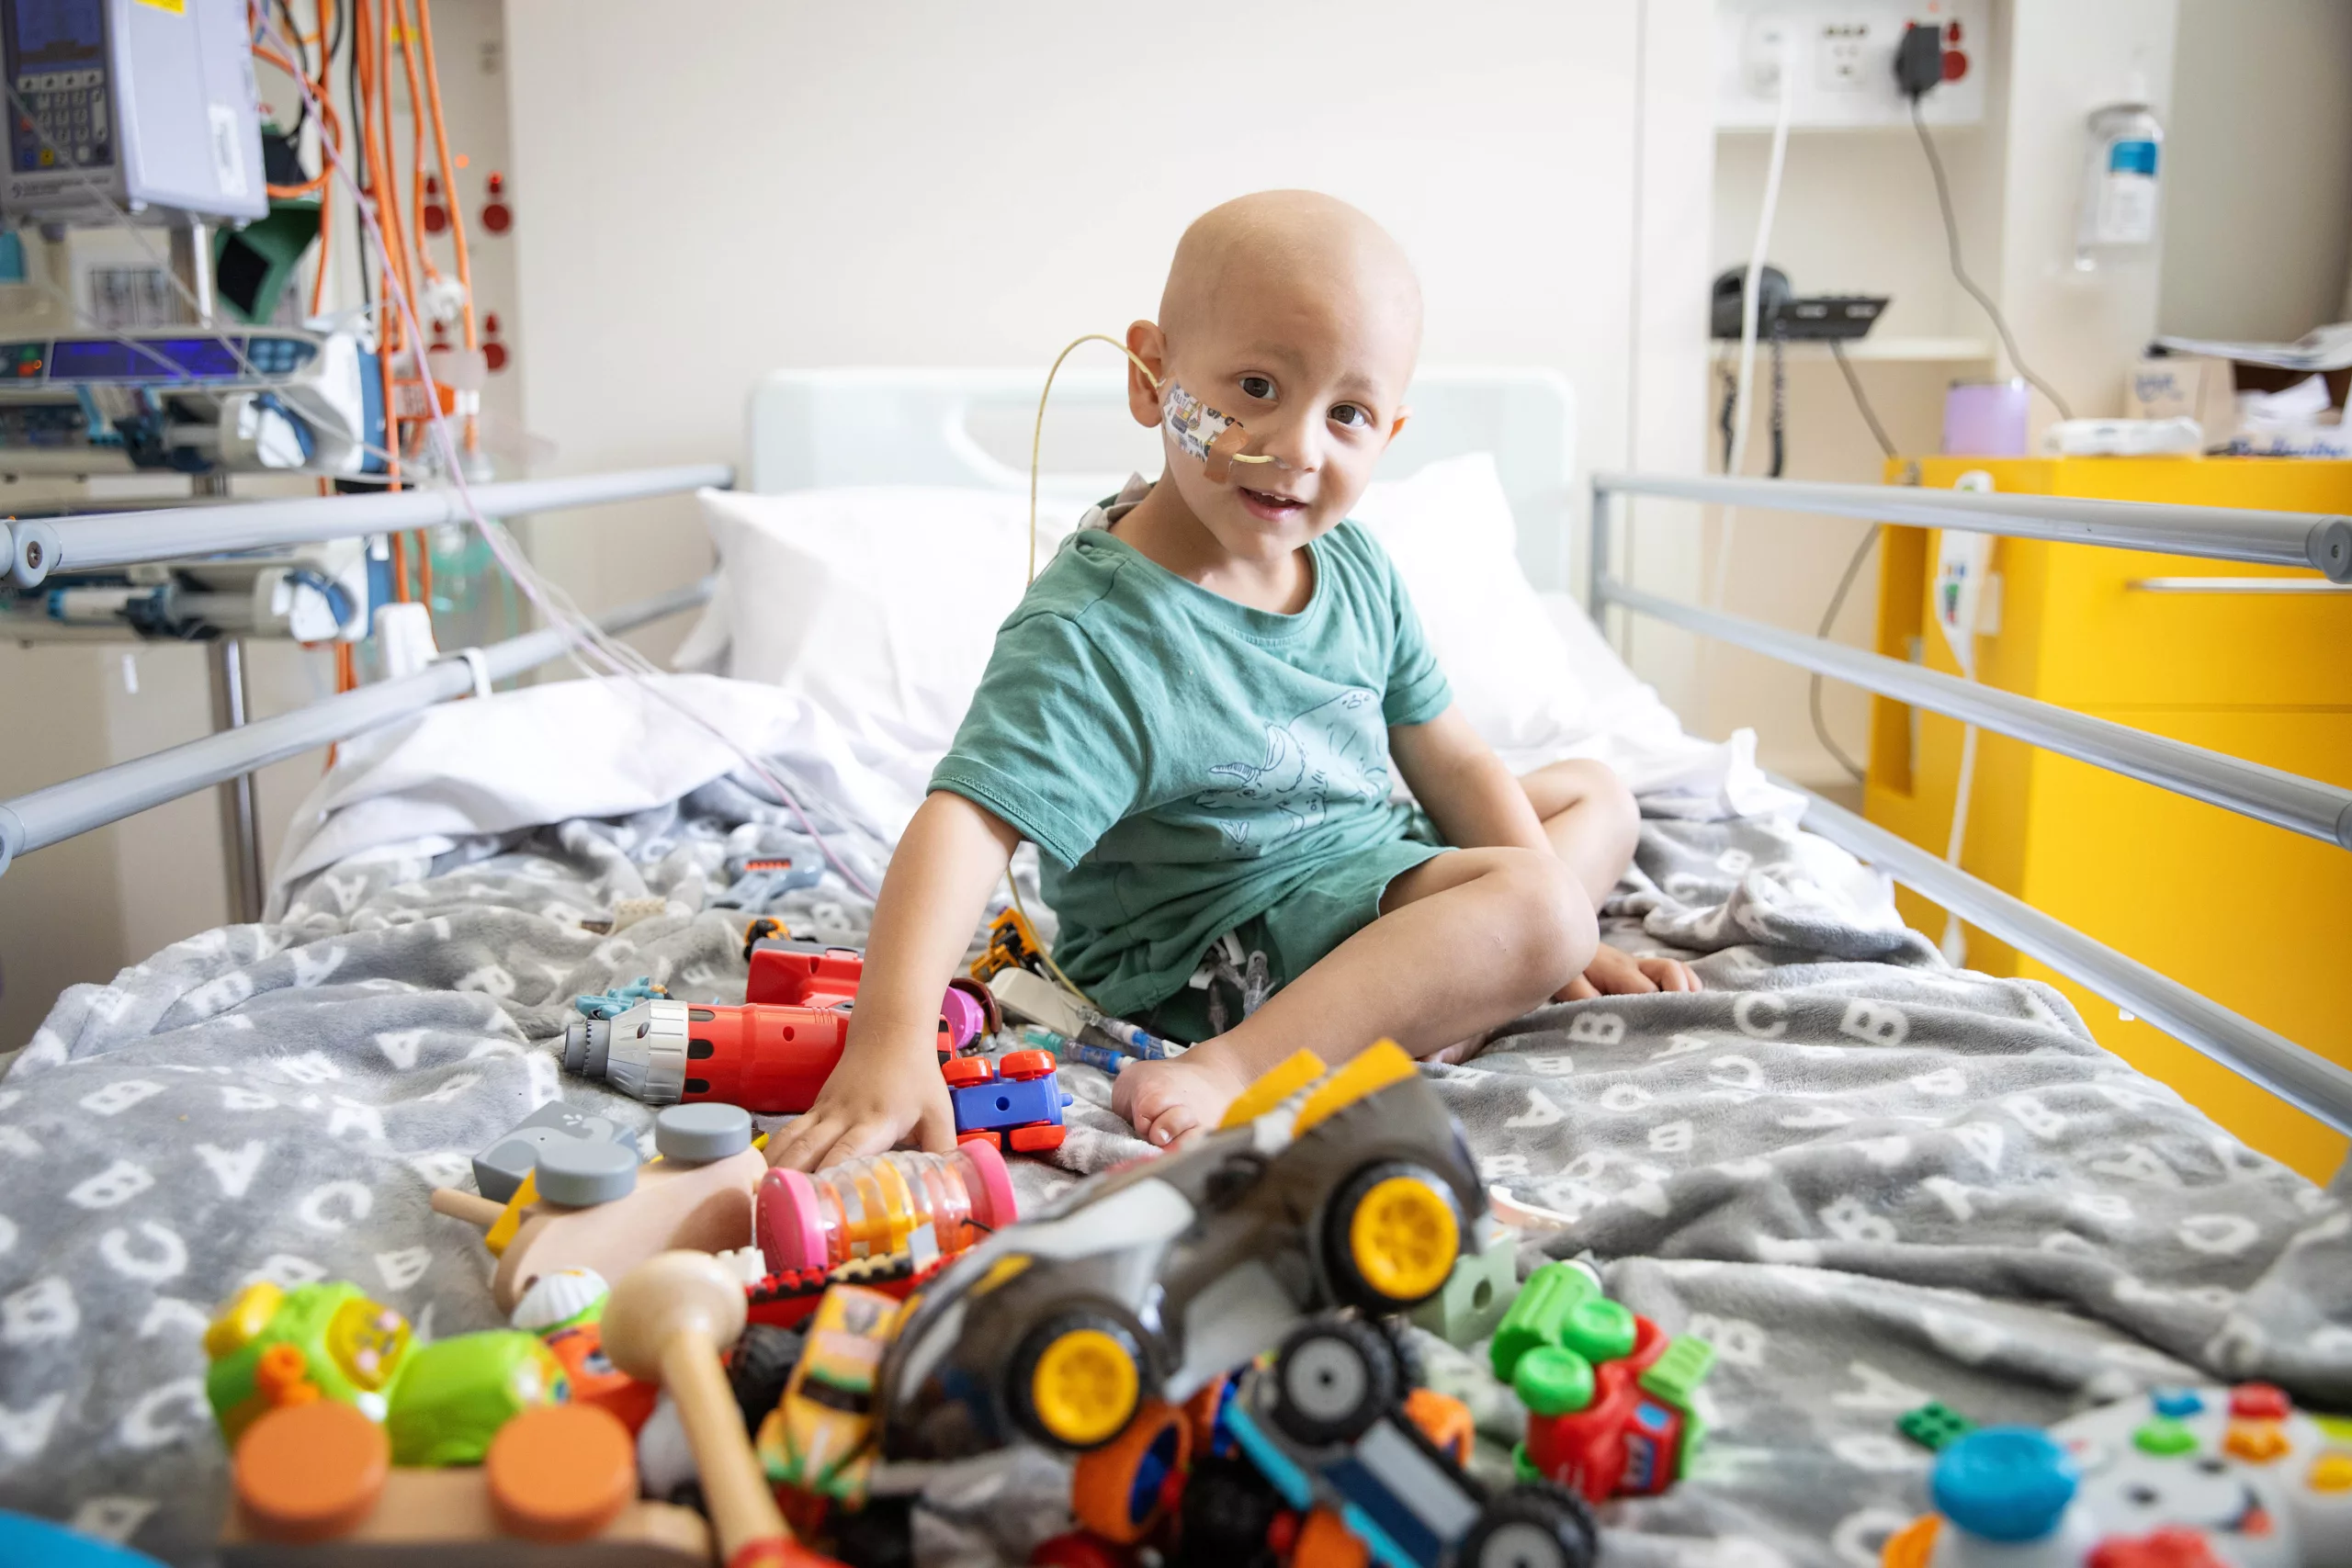 Ibrahim sits on a hospital bed at the rch melbourne in a light blue shirt playing with toy trucks and cars.